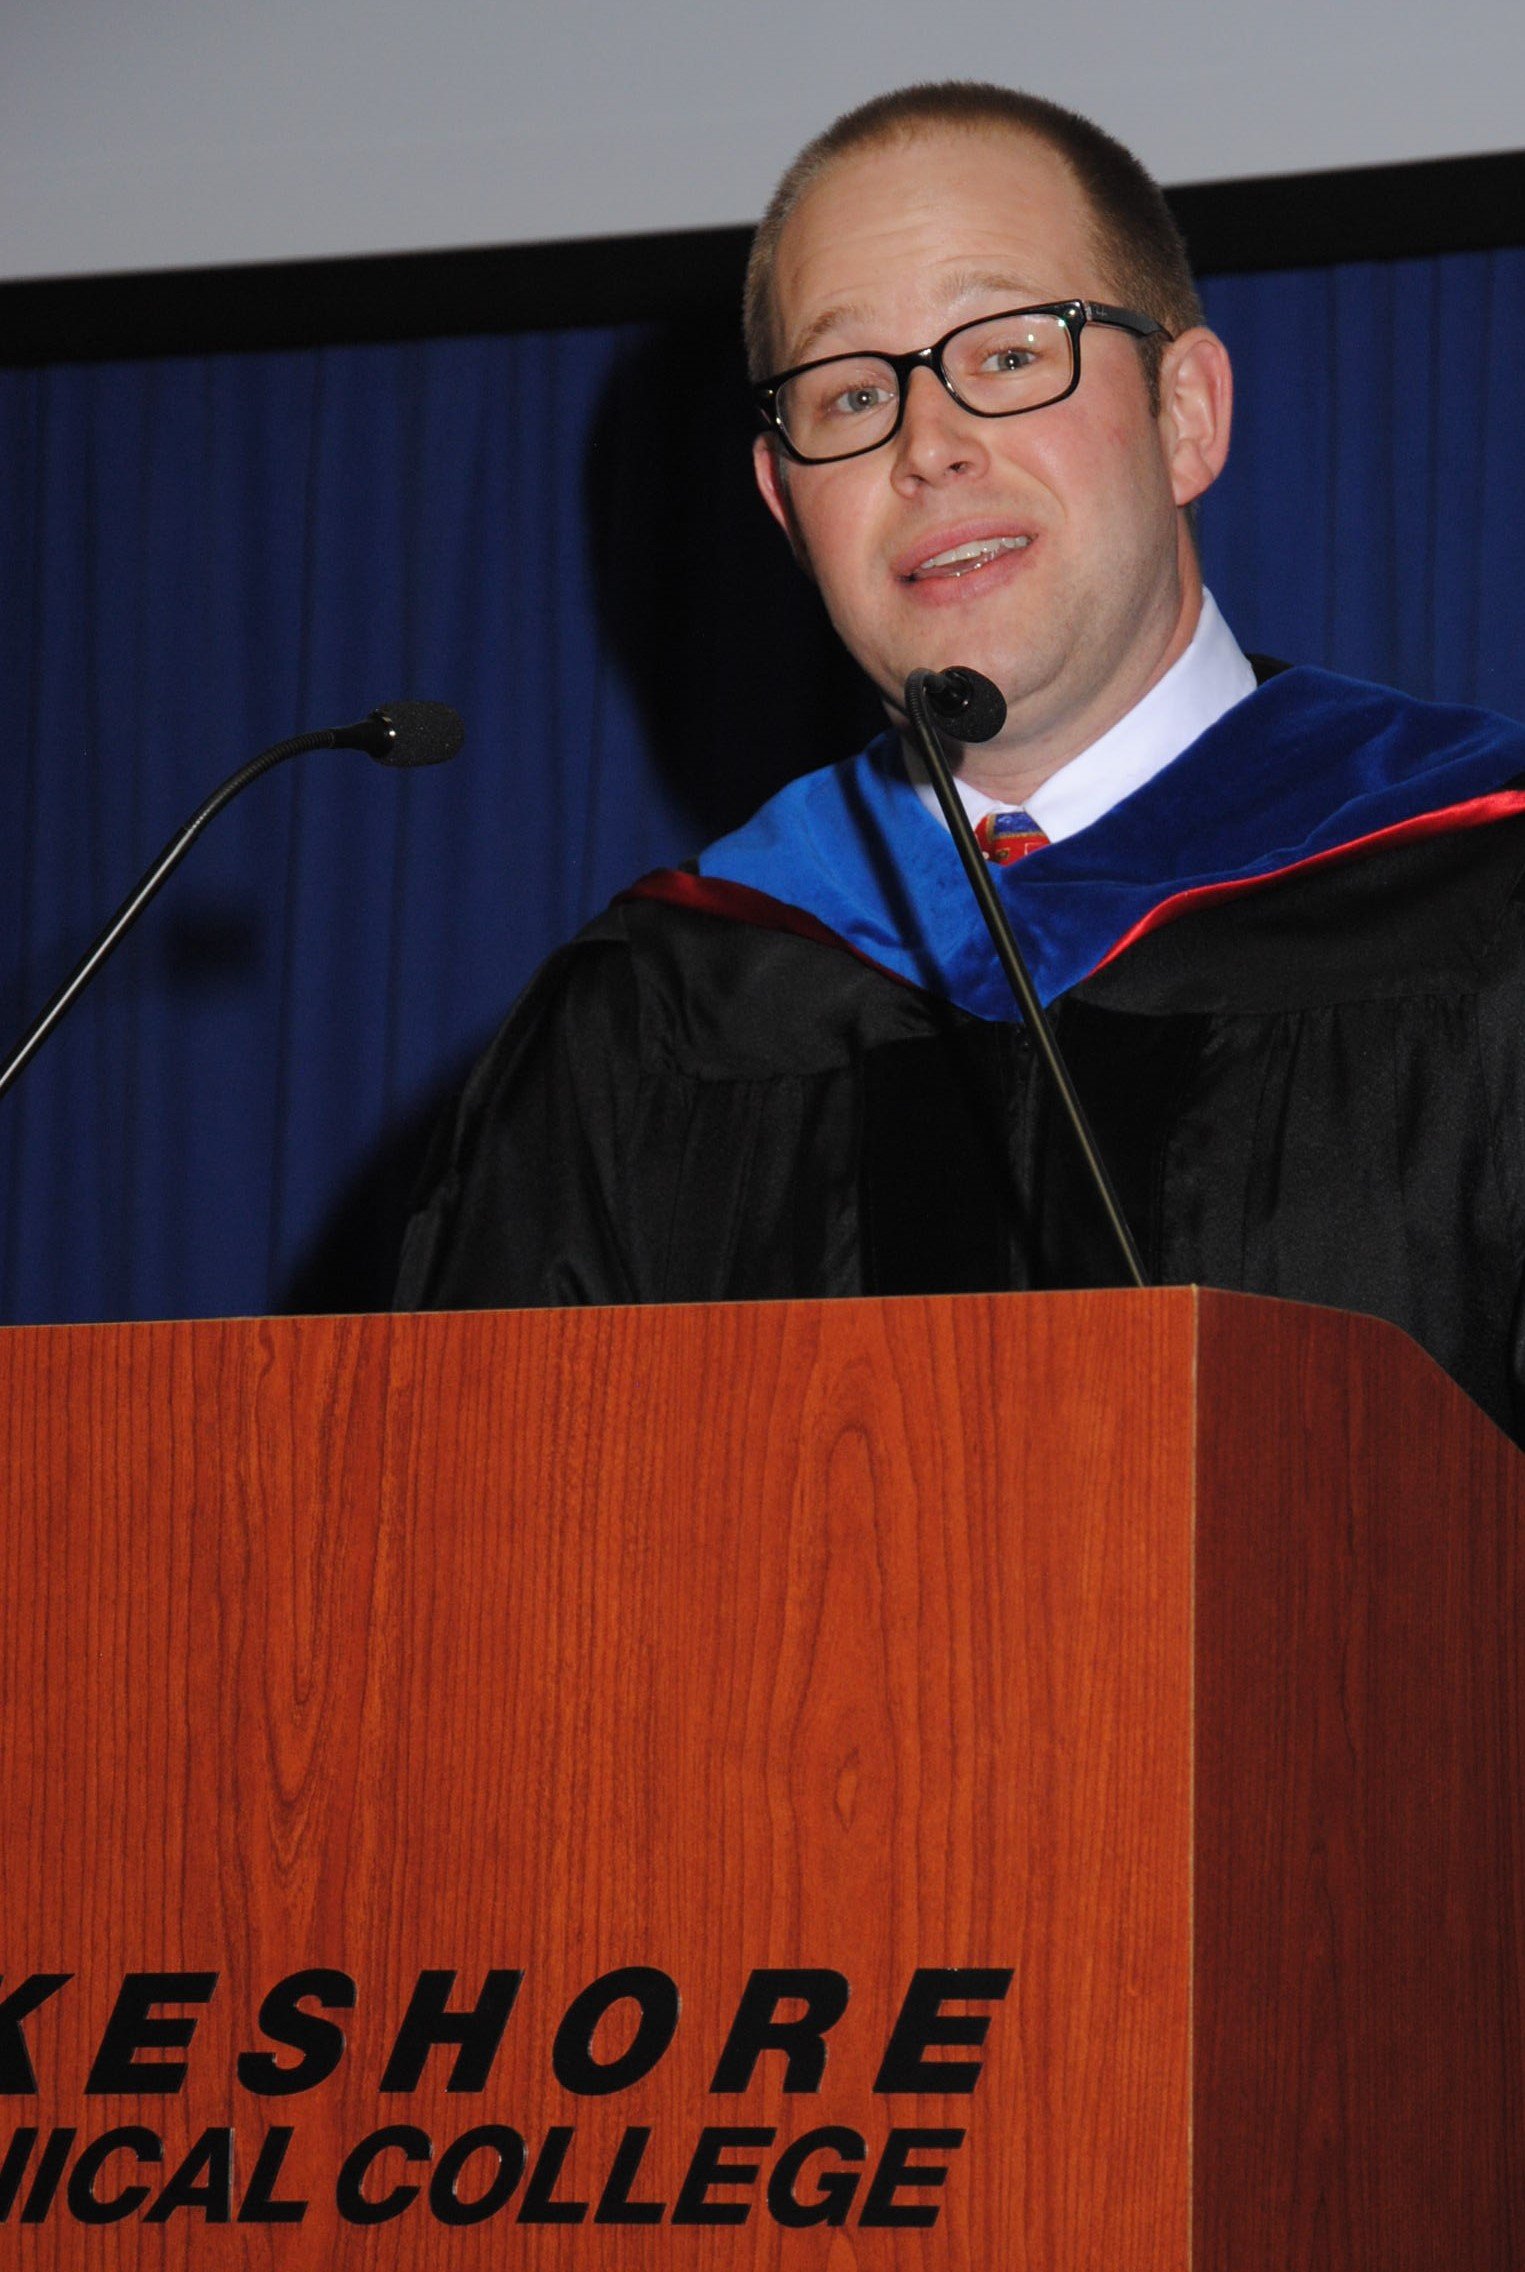 LTC President Dr. Paul Carlsen welcomes the graduates and their guests at commencement